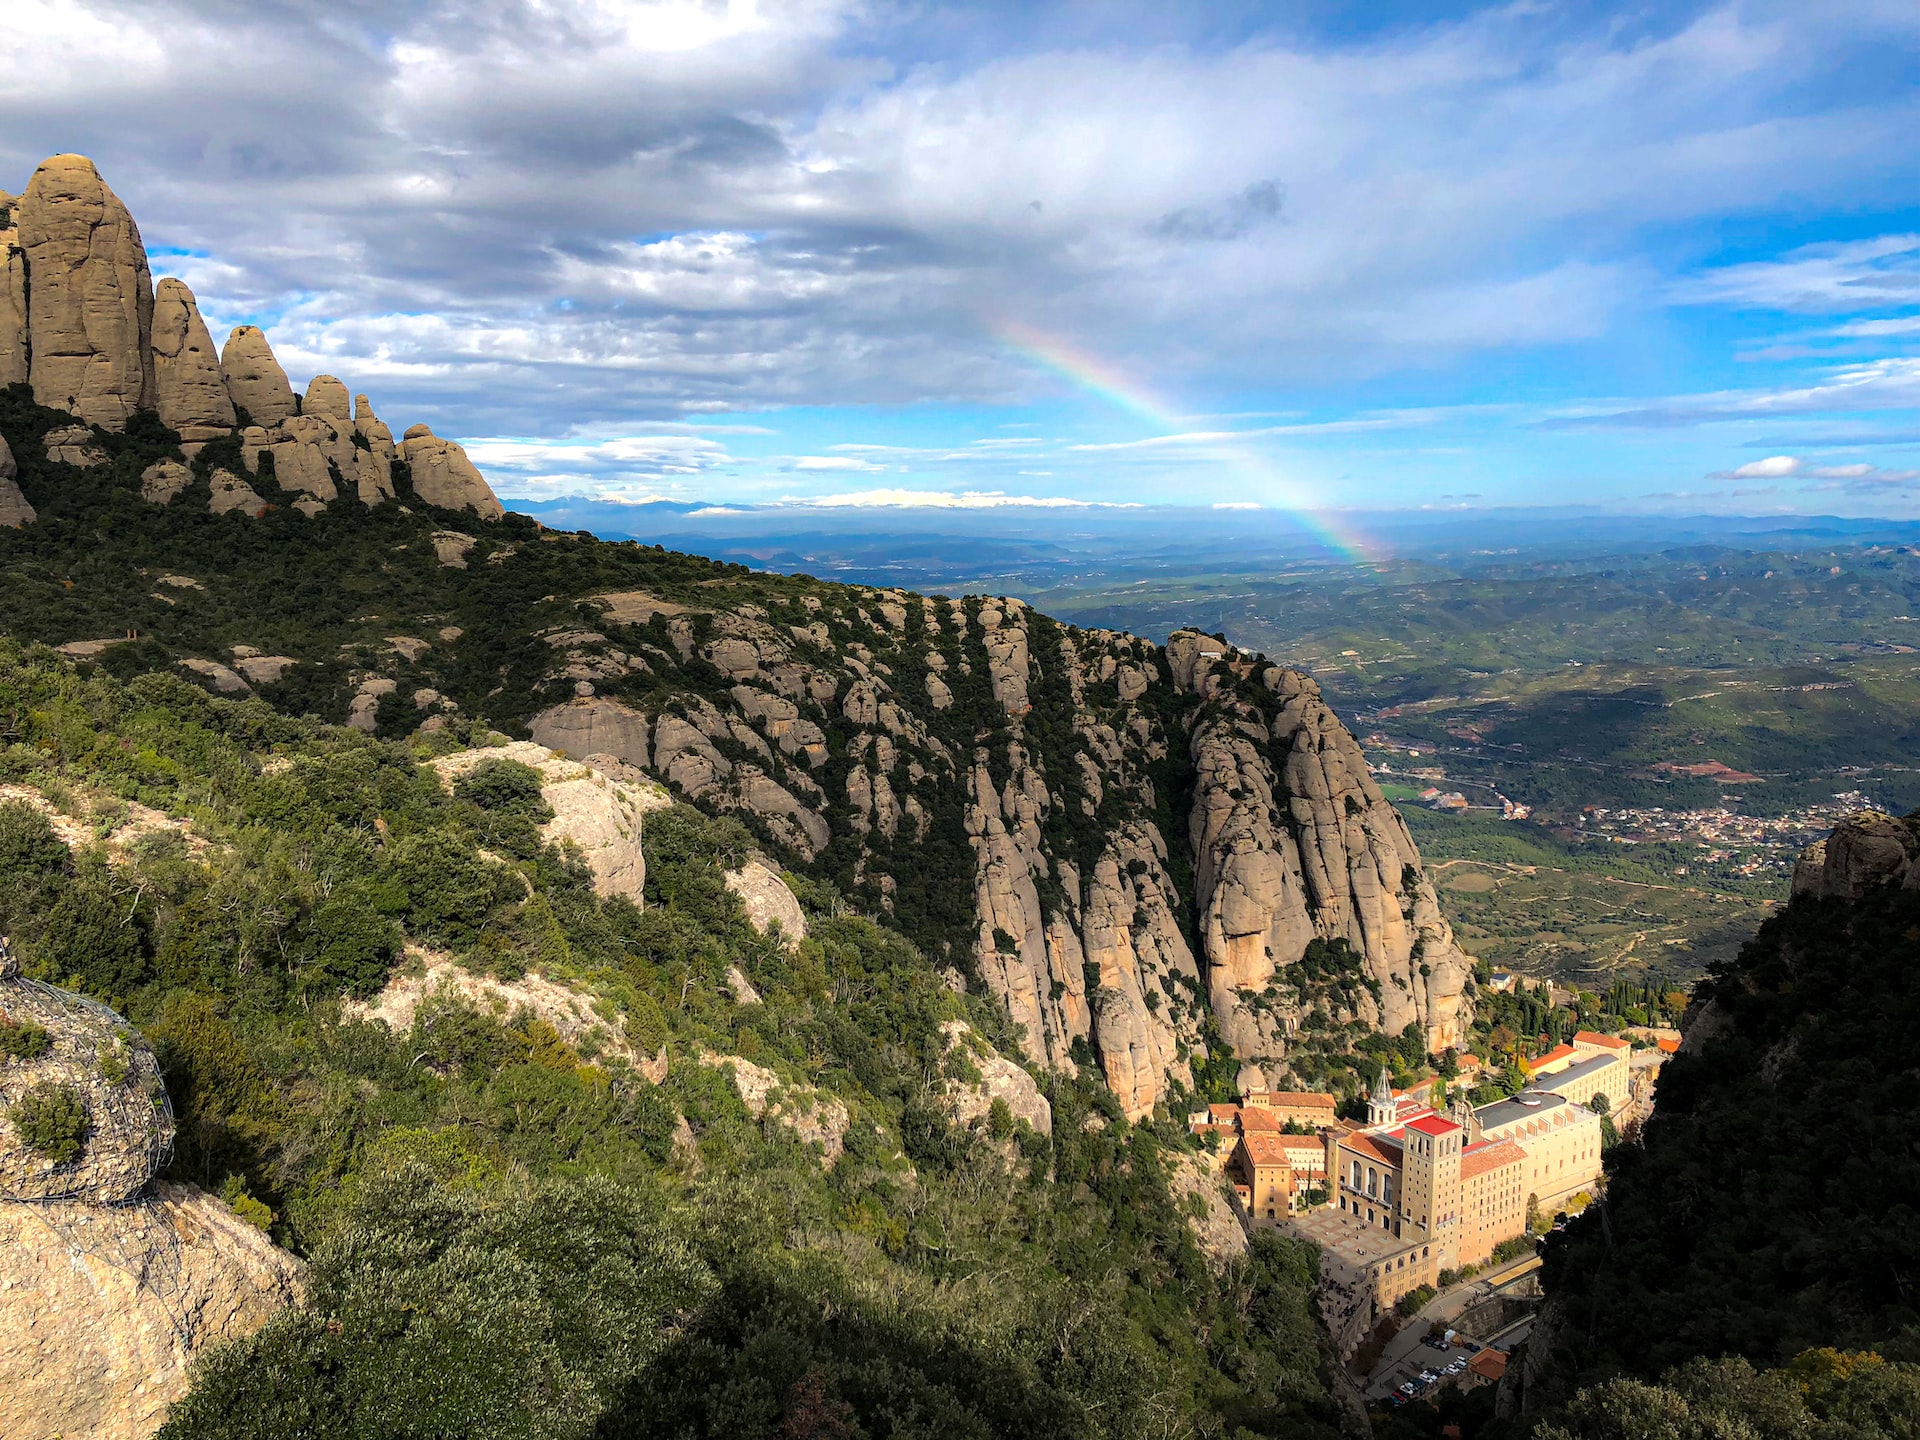 Rainbow over Montserrat mountains, home to one of the oldest wineries in the world (photo: blackieshoot)